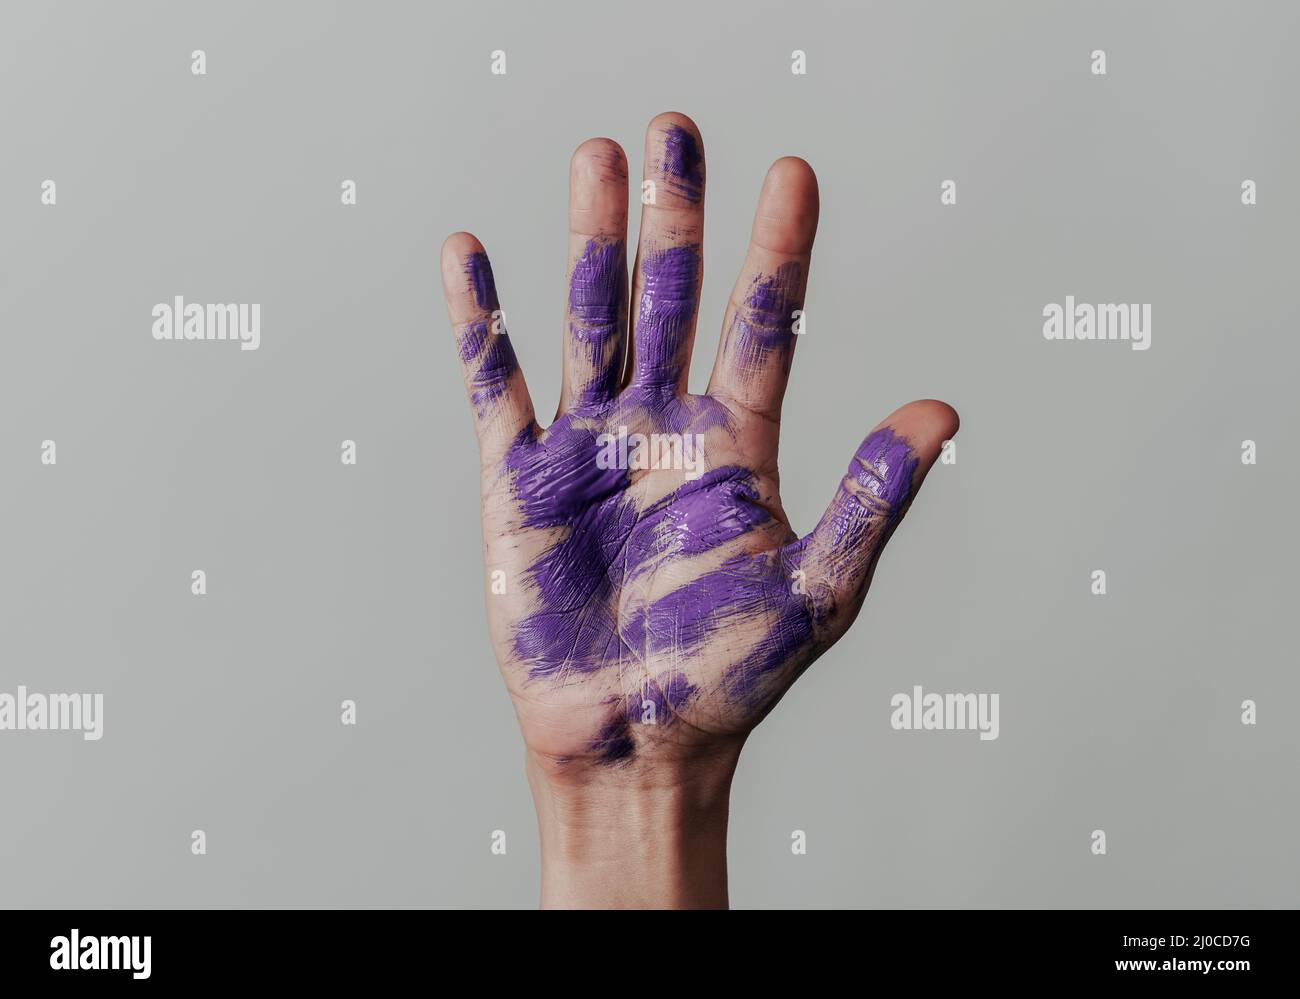 closeup of the raised hand of a man with some stains of purple paint in his palm, on a pale gray background Stock Photo